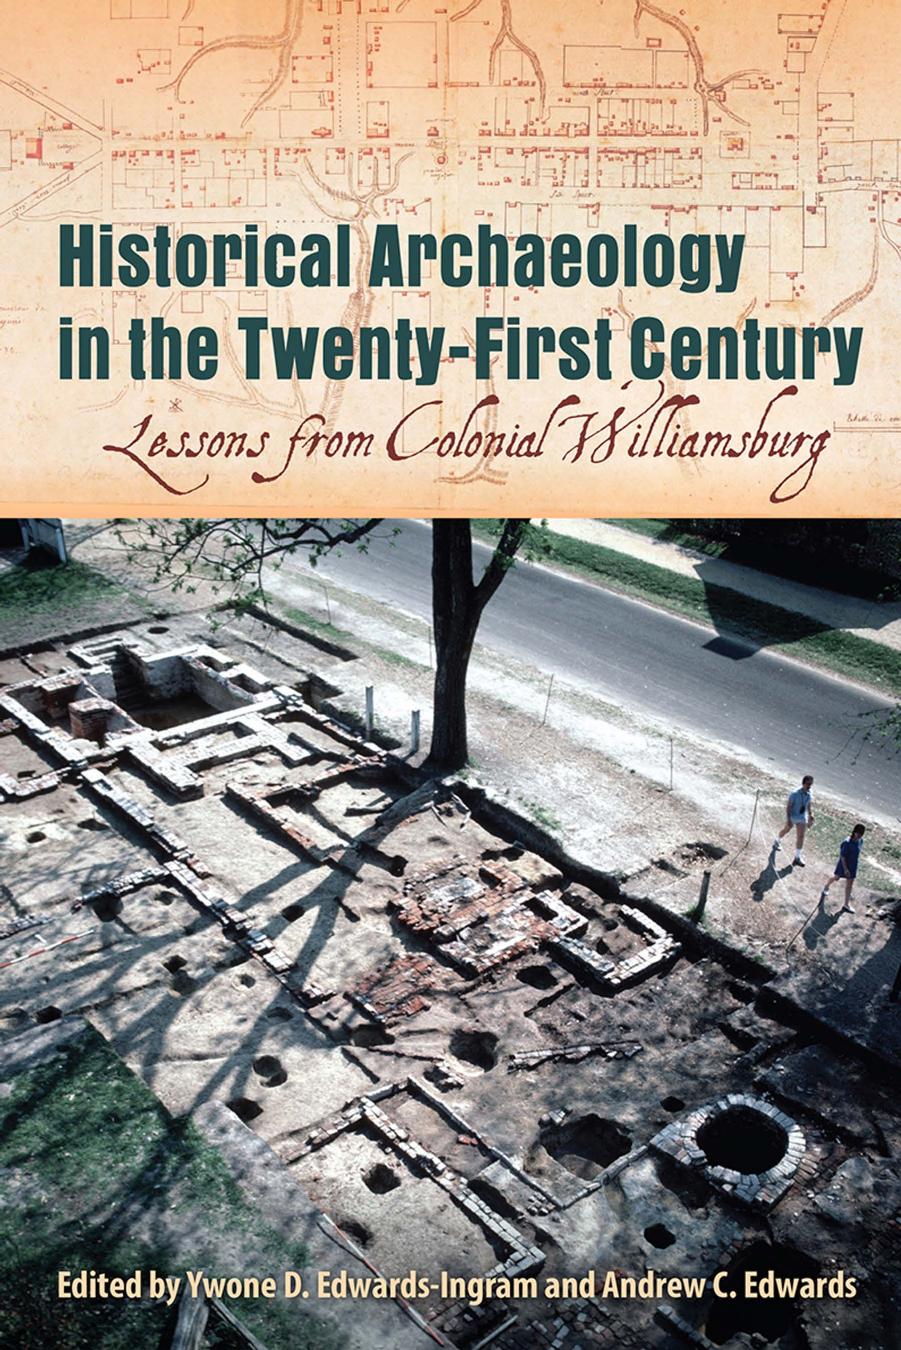 Historical Archaeology in the Twenty-First Century: Lessons from Colonial Williamsburg by Ywone D. Edwards-Ingram; Andrew C. Edwards